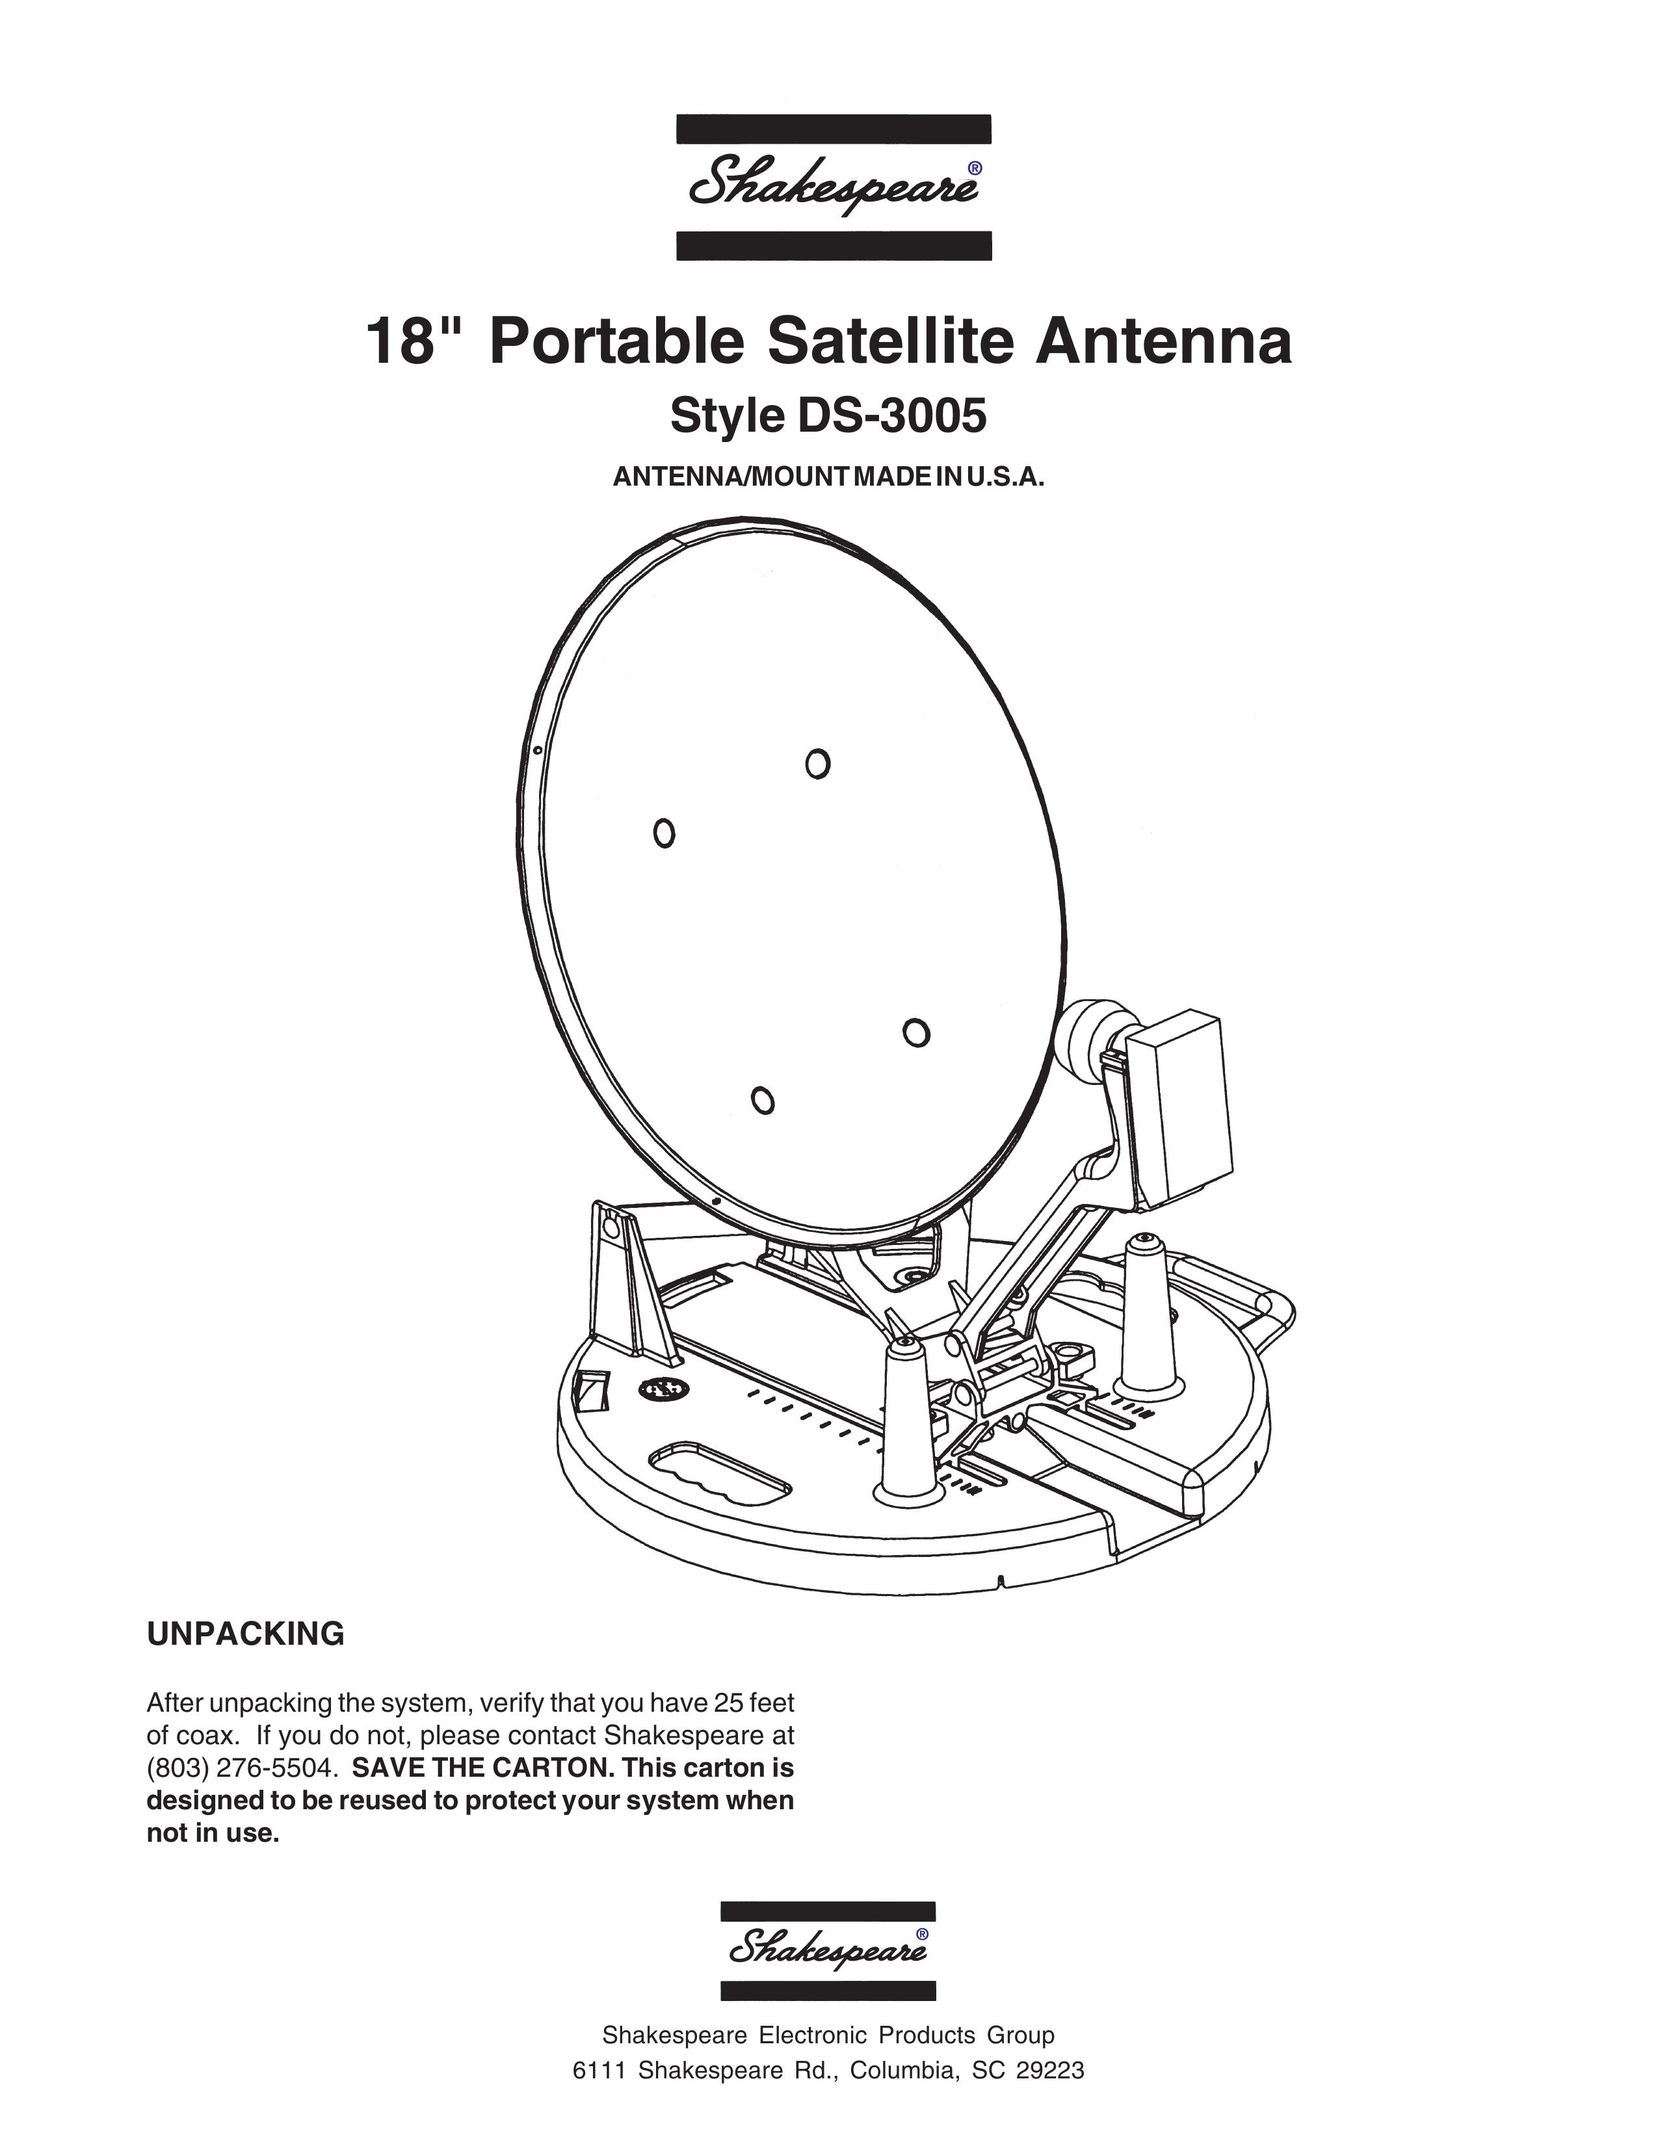 Shakespeare Electronic DS-3005 TV Antenna User Manual